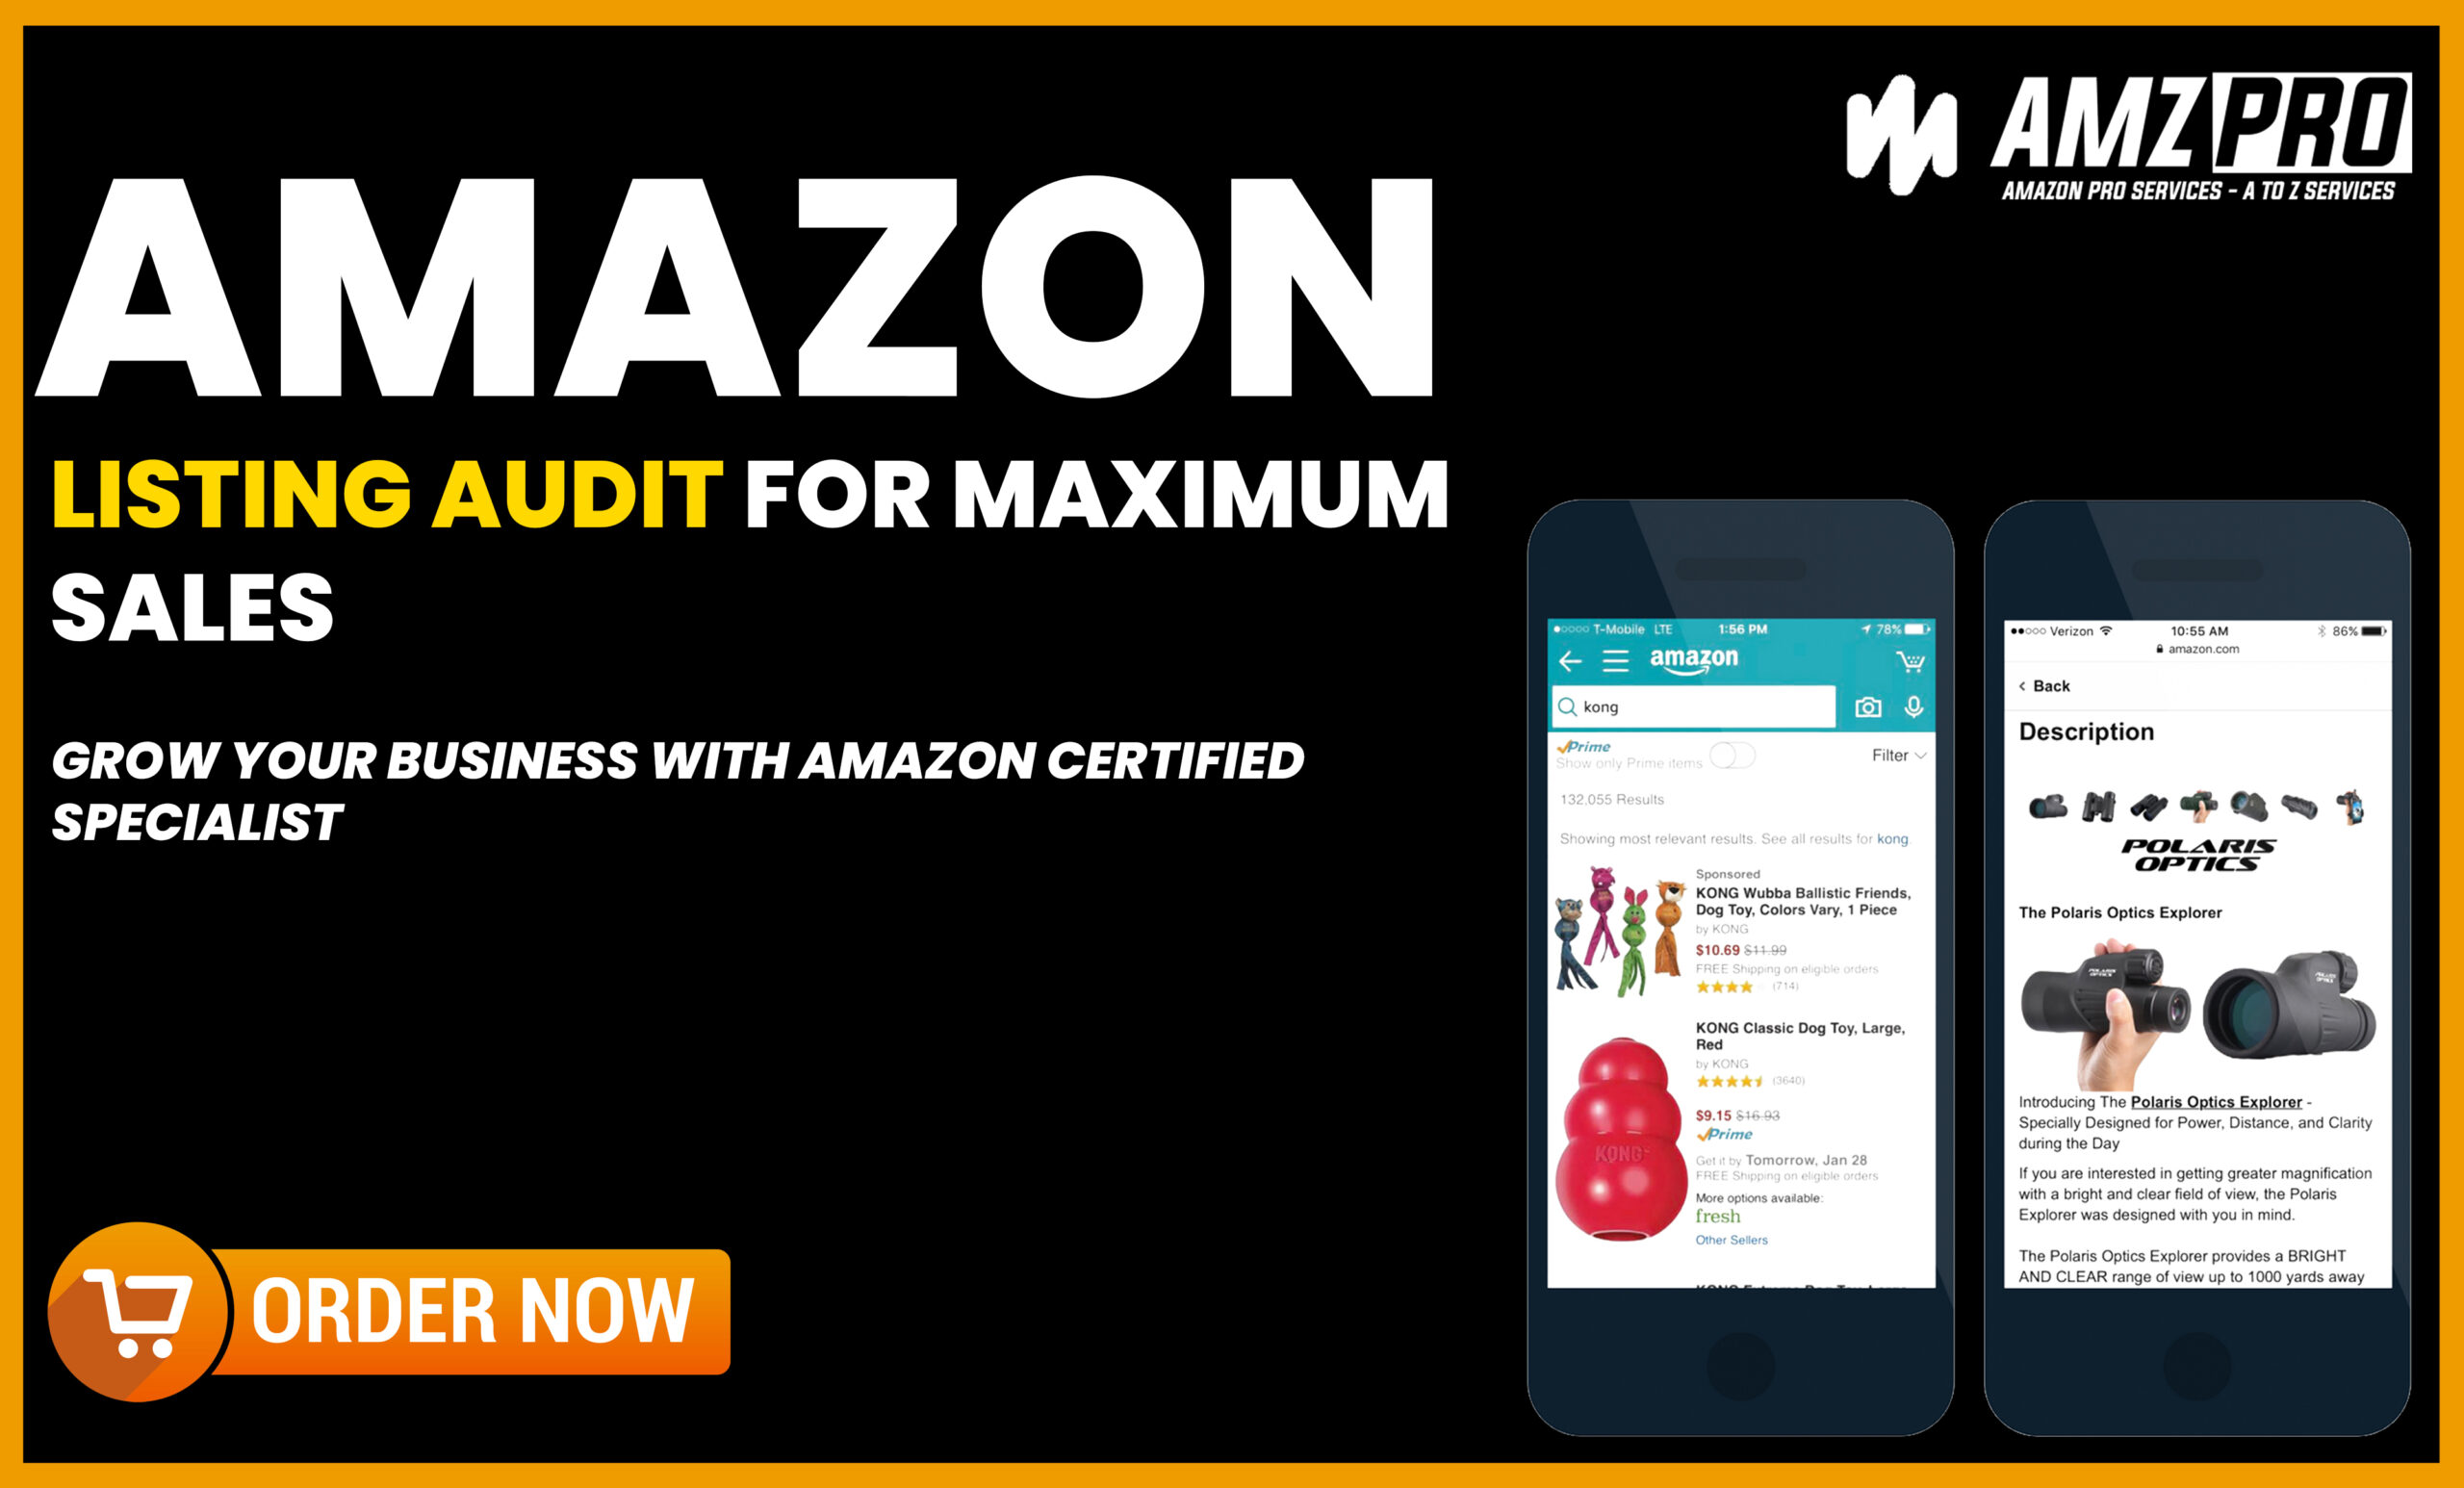 I will perform audit on amazon listing to increase sales, FiverrBox